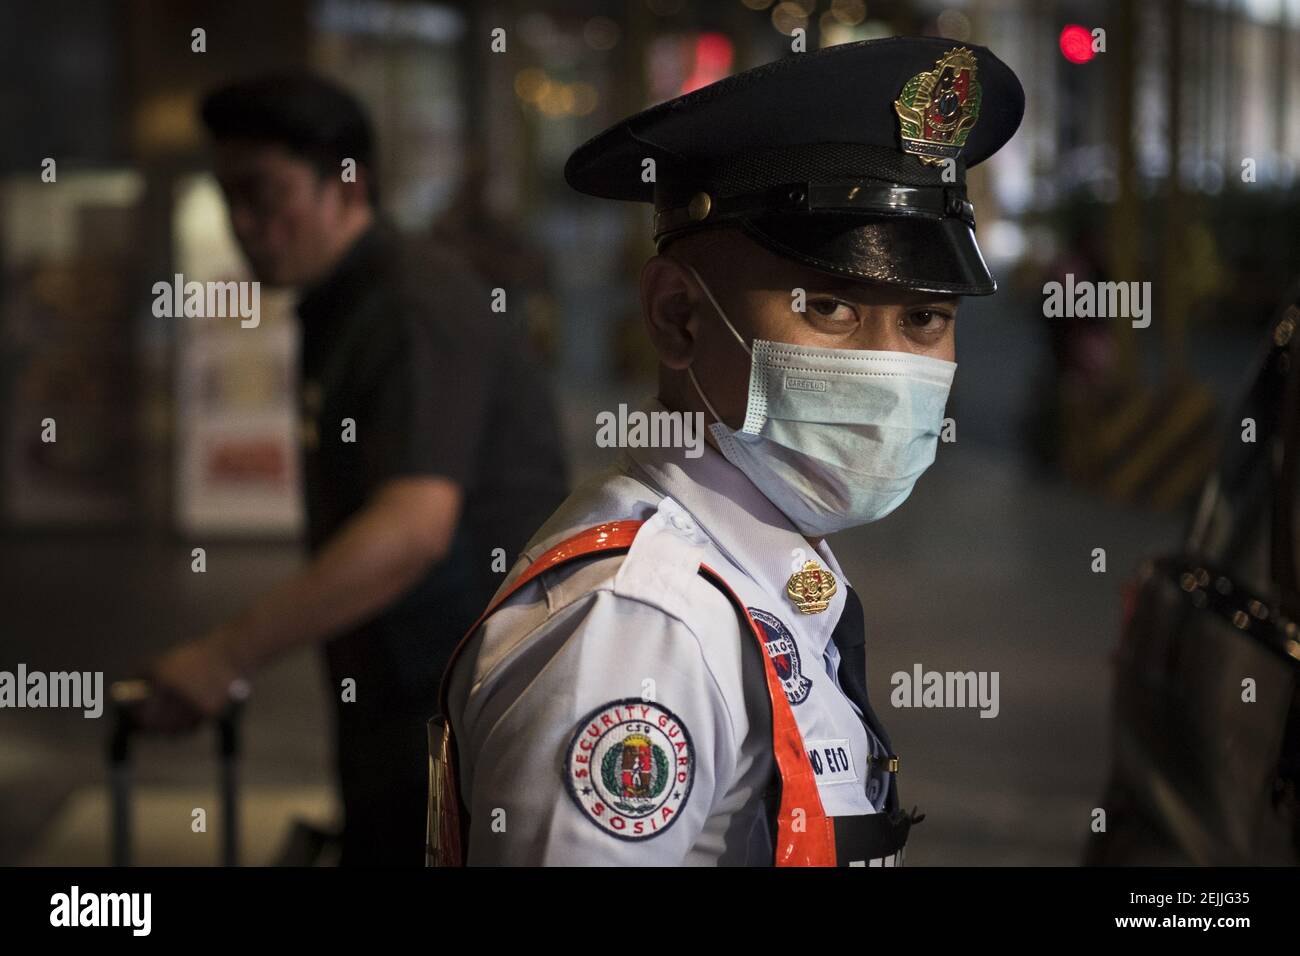 A security guard wears a face mask as a precaution to the outbreak of the coronavirus. Filipinos remain anxious over a new coronavirus known as Covid-19 which originated in Wuhan, China in December 2019. The Philippines’ Department of Health announced the country’s first death due to the virus on 2 February - the first reported death outside of China. The number of 2019-nCoV cases worldwide has already surpassed that of the 2003 Sars epidemic, with the death toll now over 1300. (Photo by Oliver Haynes / SOPA Images/Sipa USA) Stock Photo